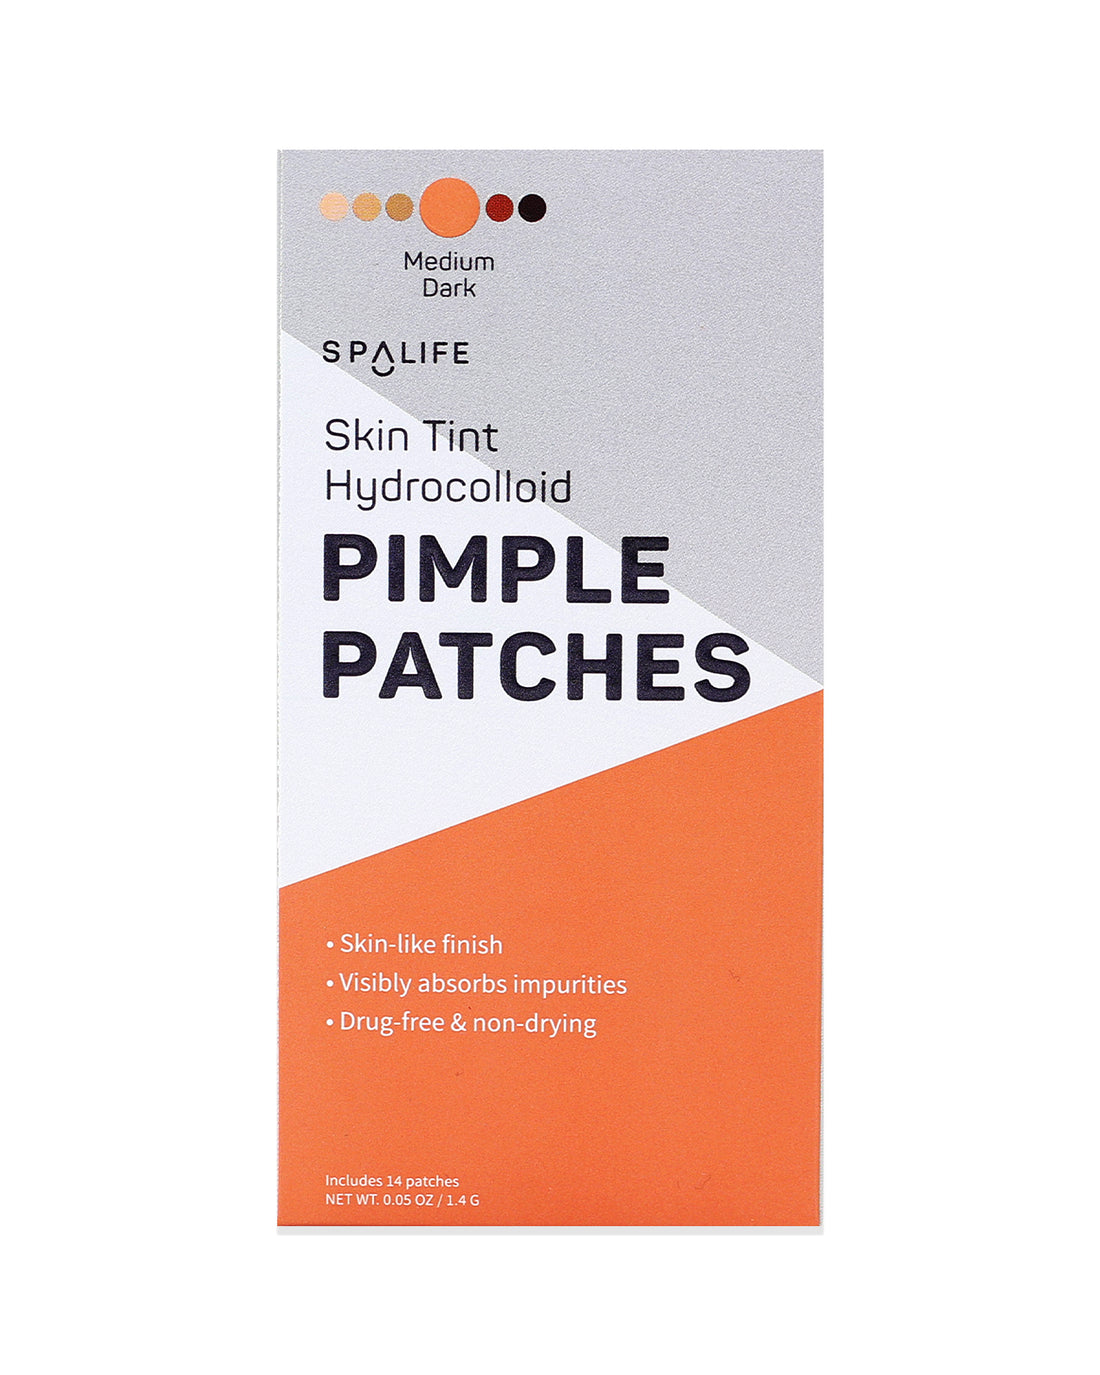 Skin_tint_pimple_patches_packe-436